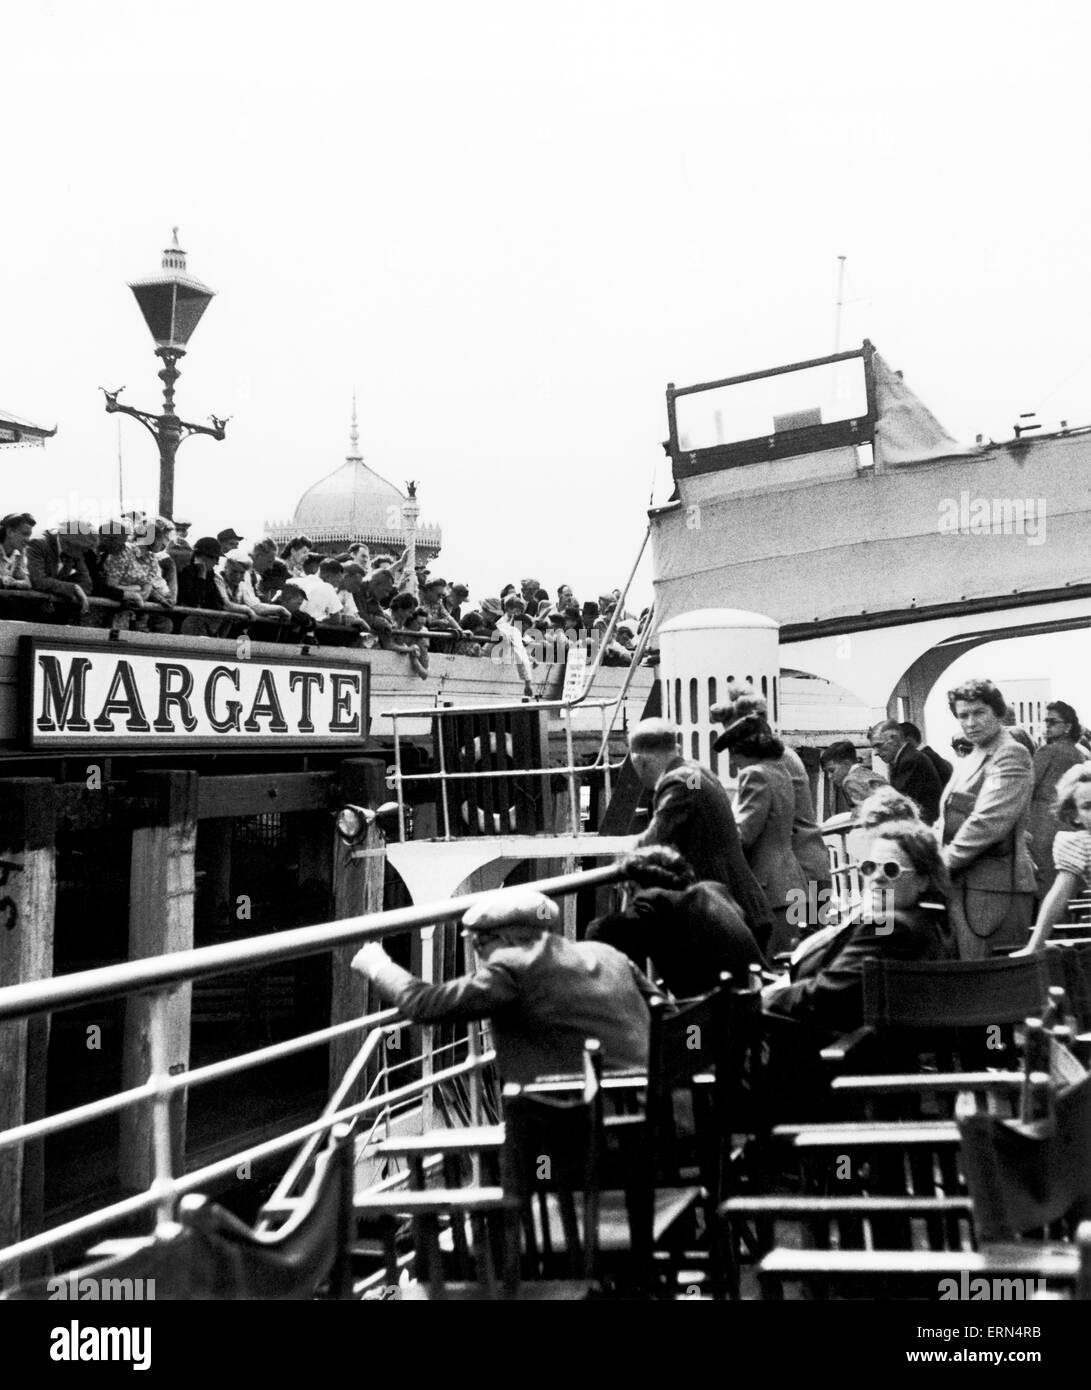 The British People are traditionally a sea-fairing race, and Londoners are no exception. With Old Father Thames constantly drawing them, they like no outing better than a day's trip down the river to Margate. Circa 1960. Stock Photo